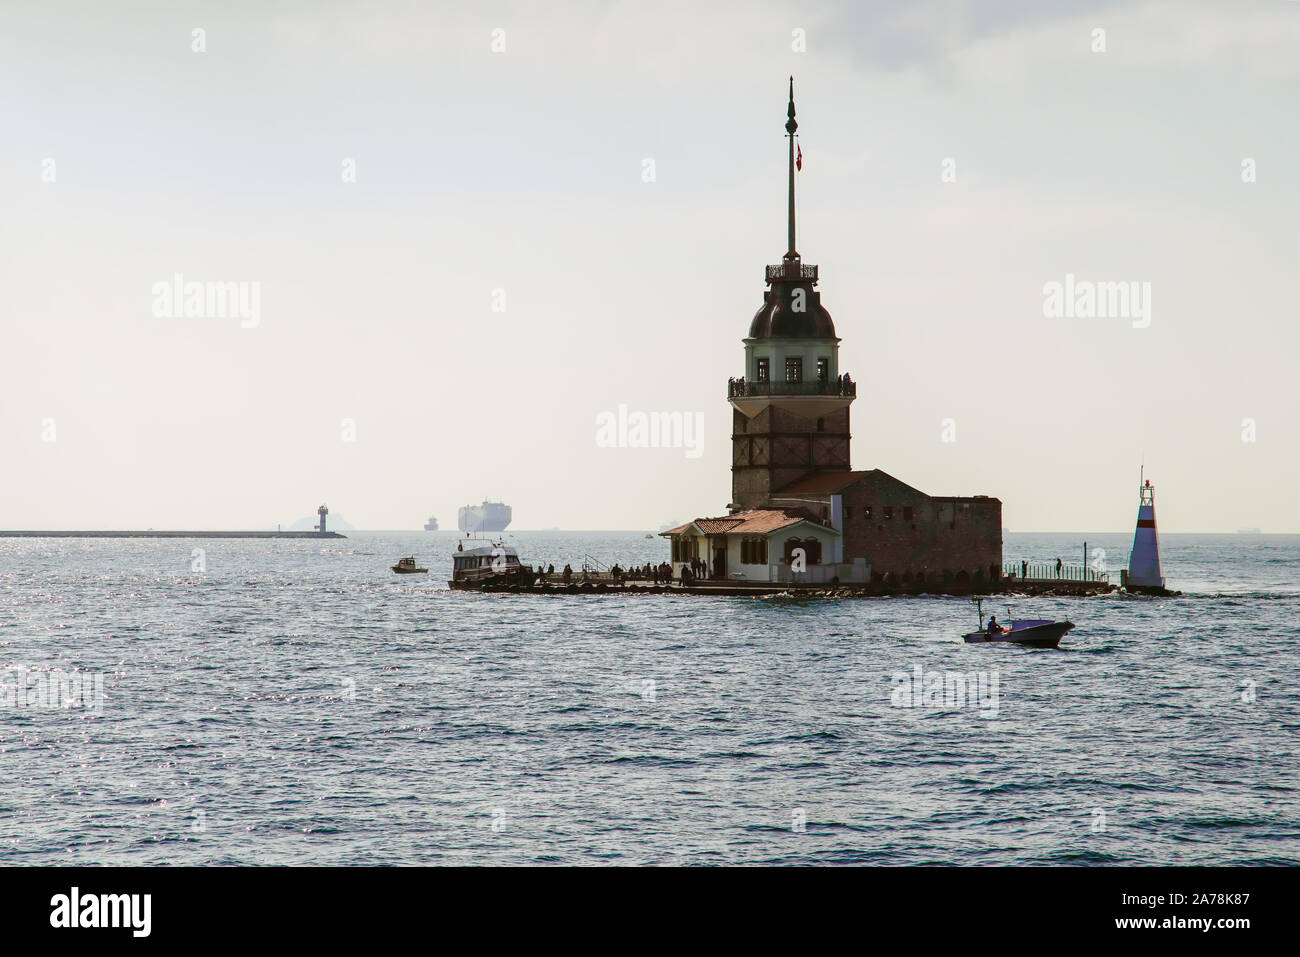 The Maiden’s Tower is a quaint tower in Bosphorus strait off of the coast of Istanbul, Turkey. Stock Photo